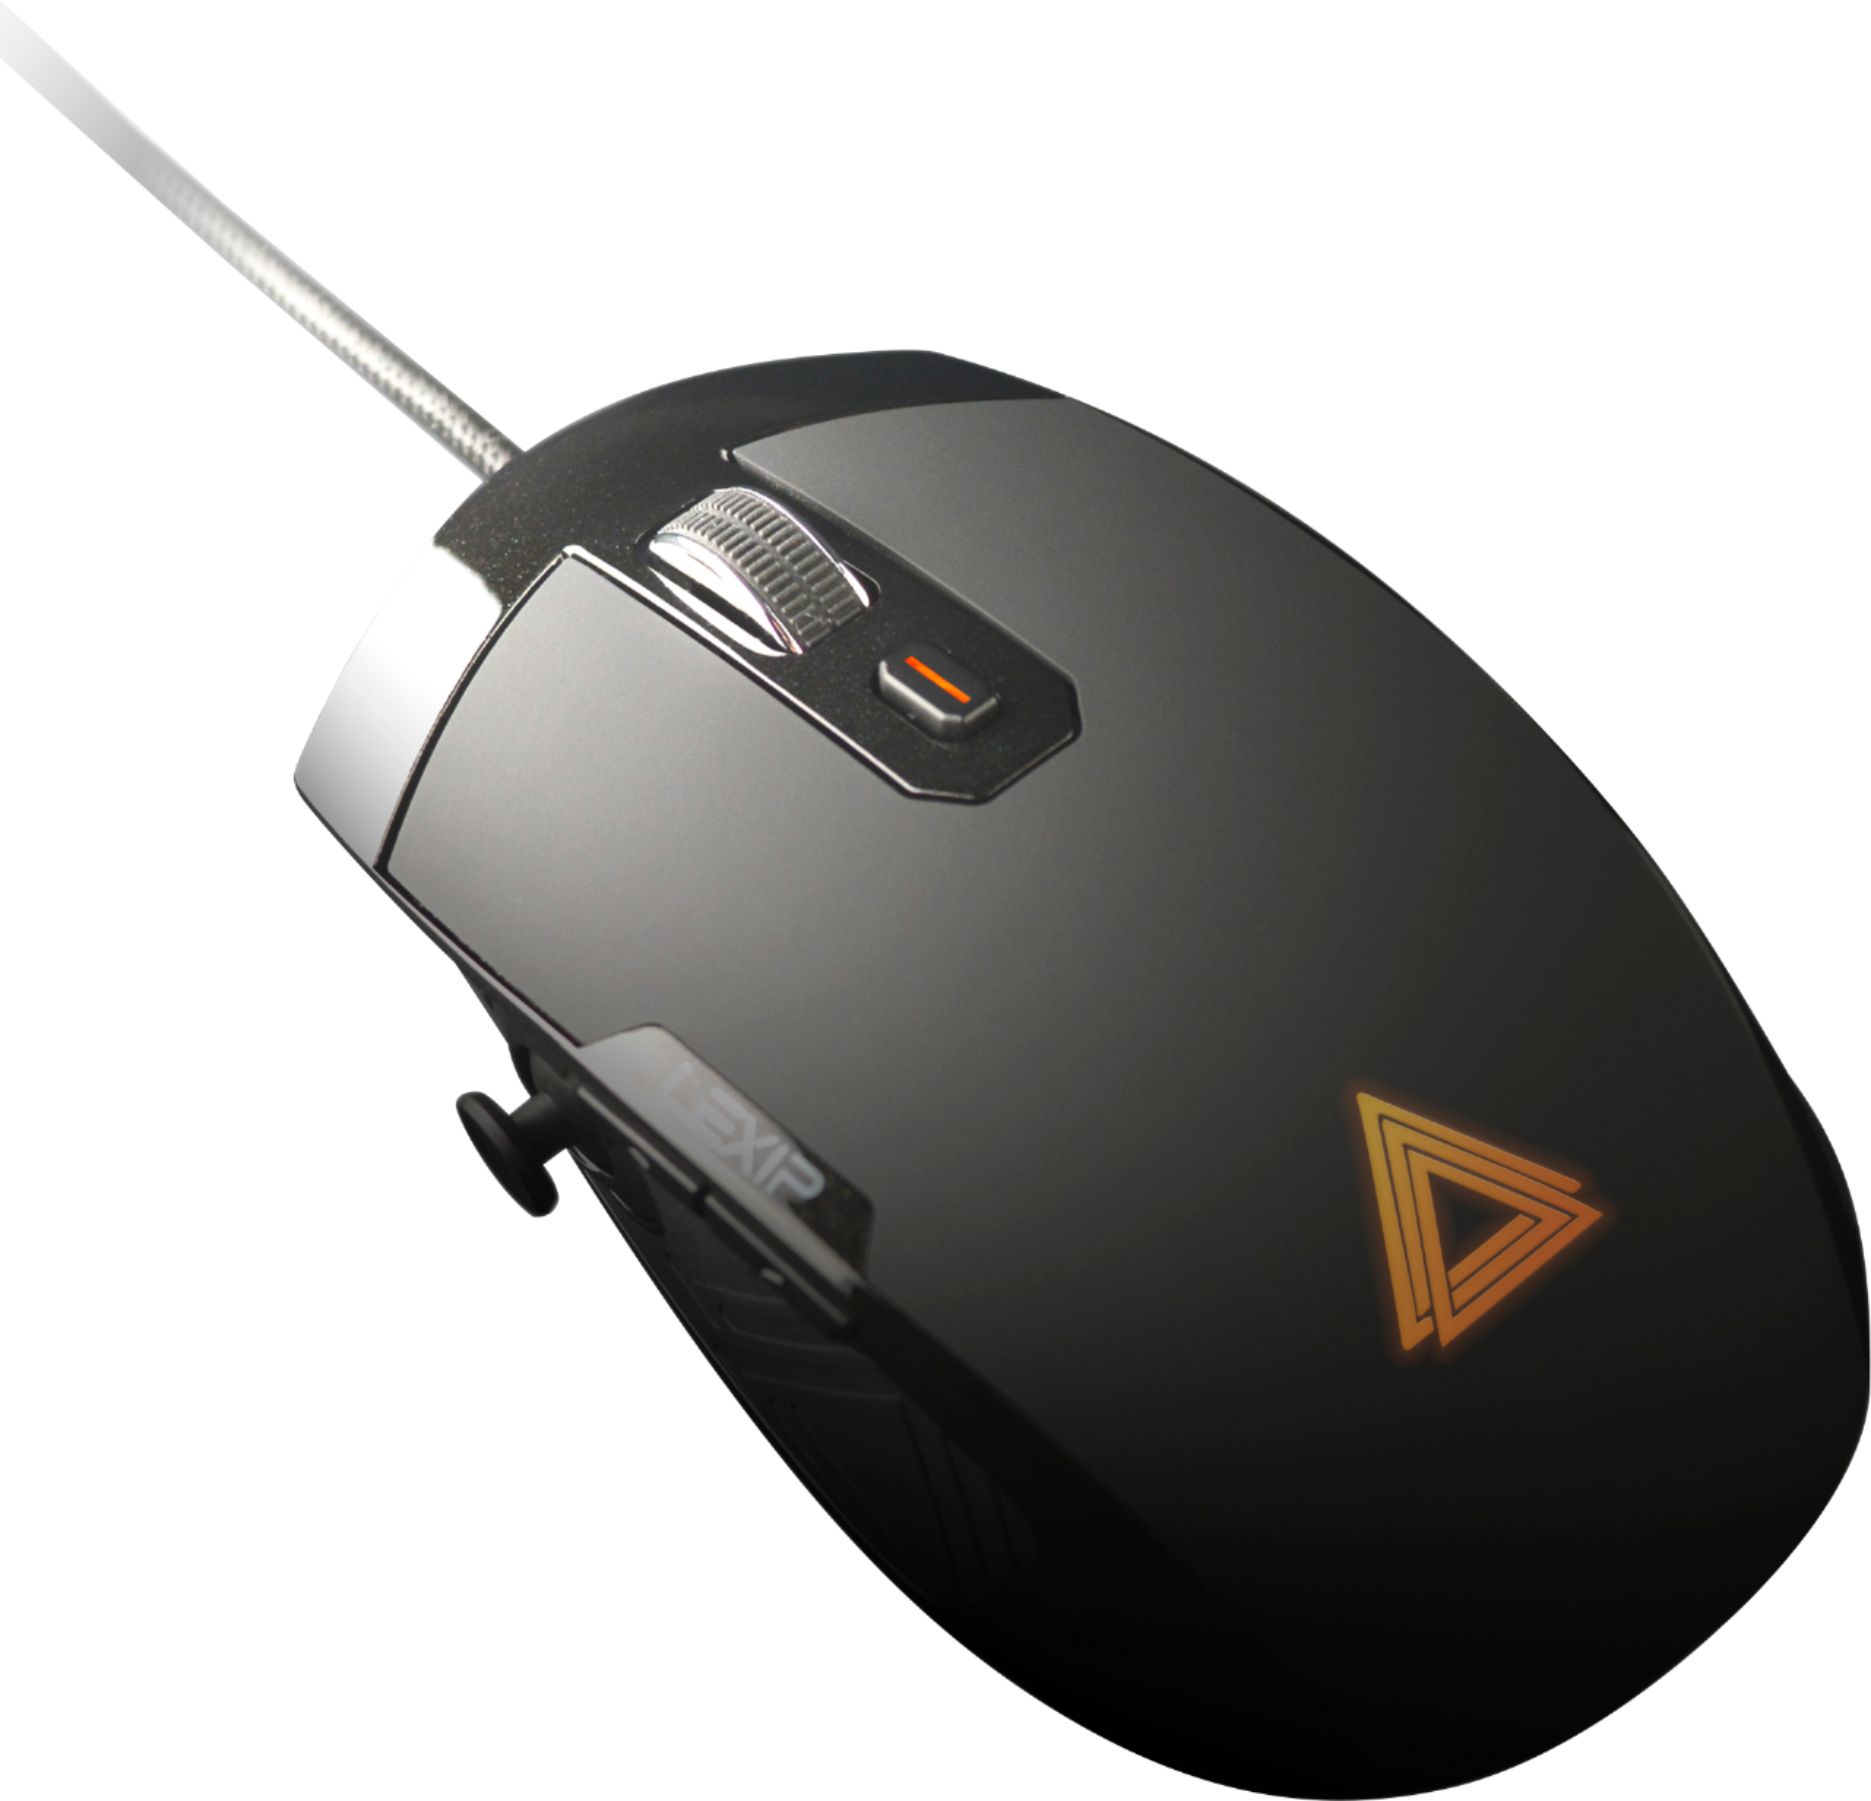 Lexip - Pu94 Wired Gaming Mouse - Black - .99